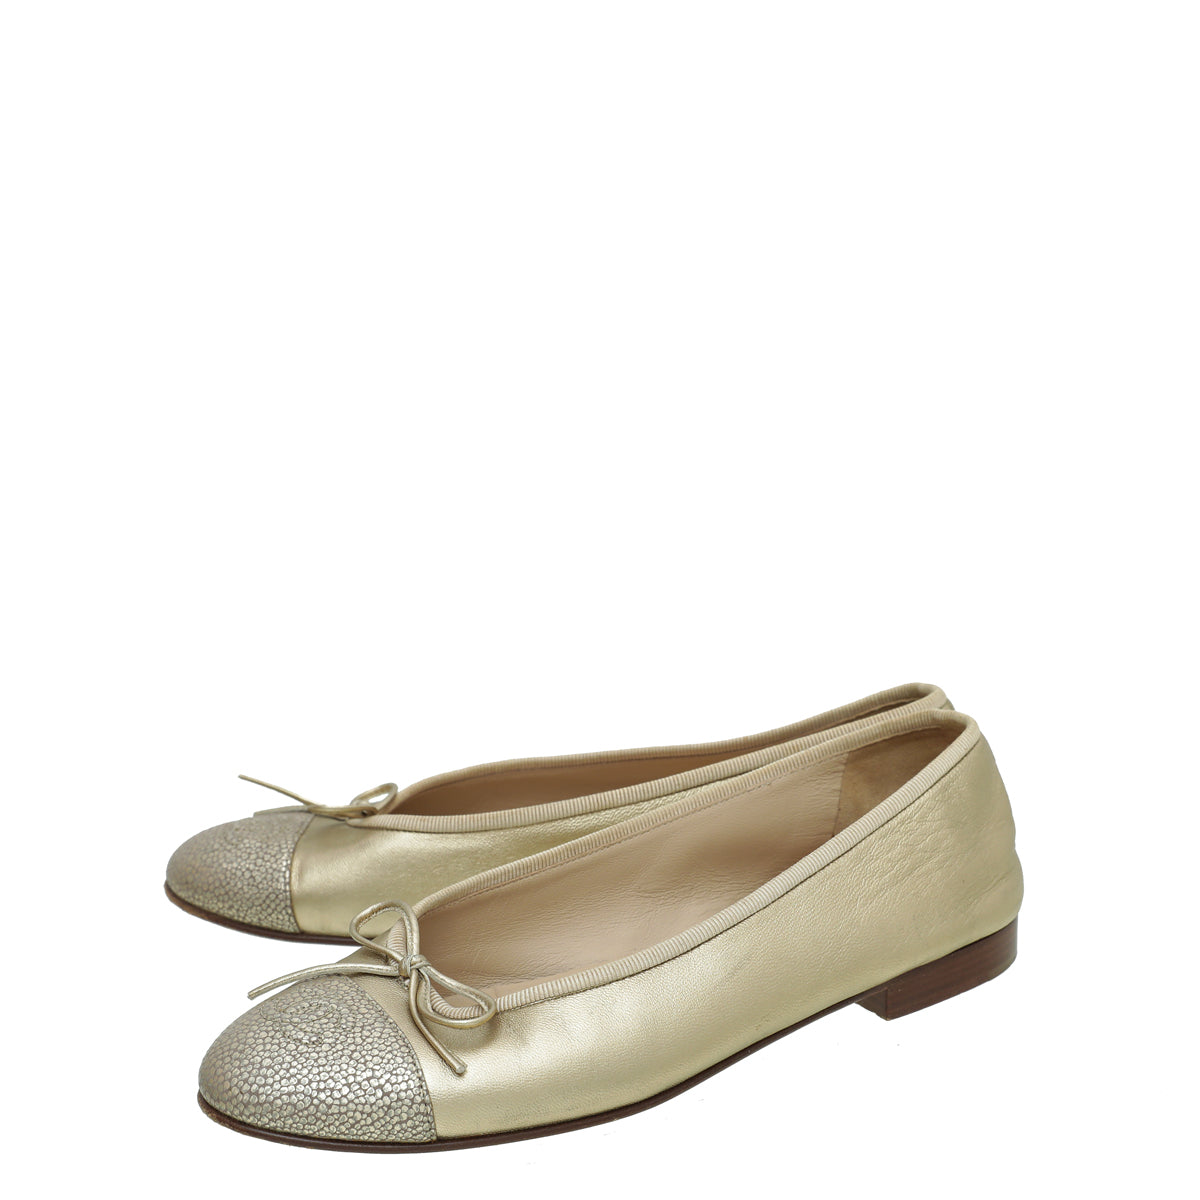 Authentic Second Hand Chanel Ballerina Flats PSS14500002  THE FIFTH  COLLECTION